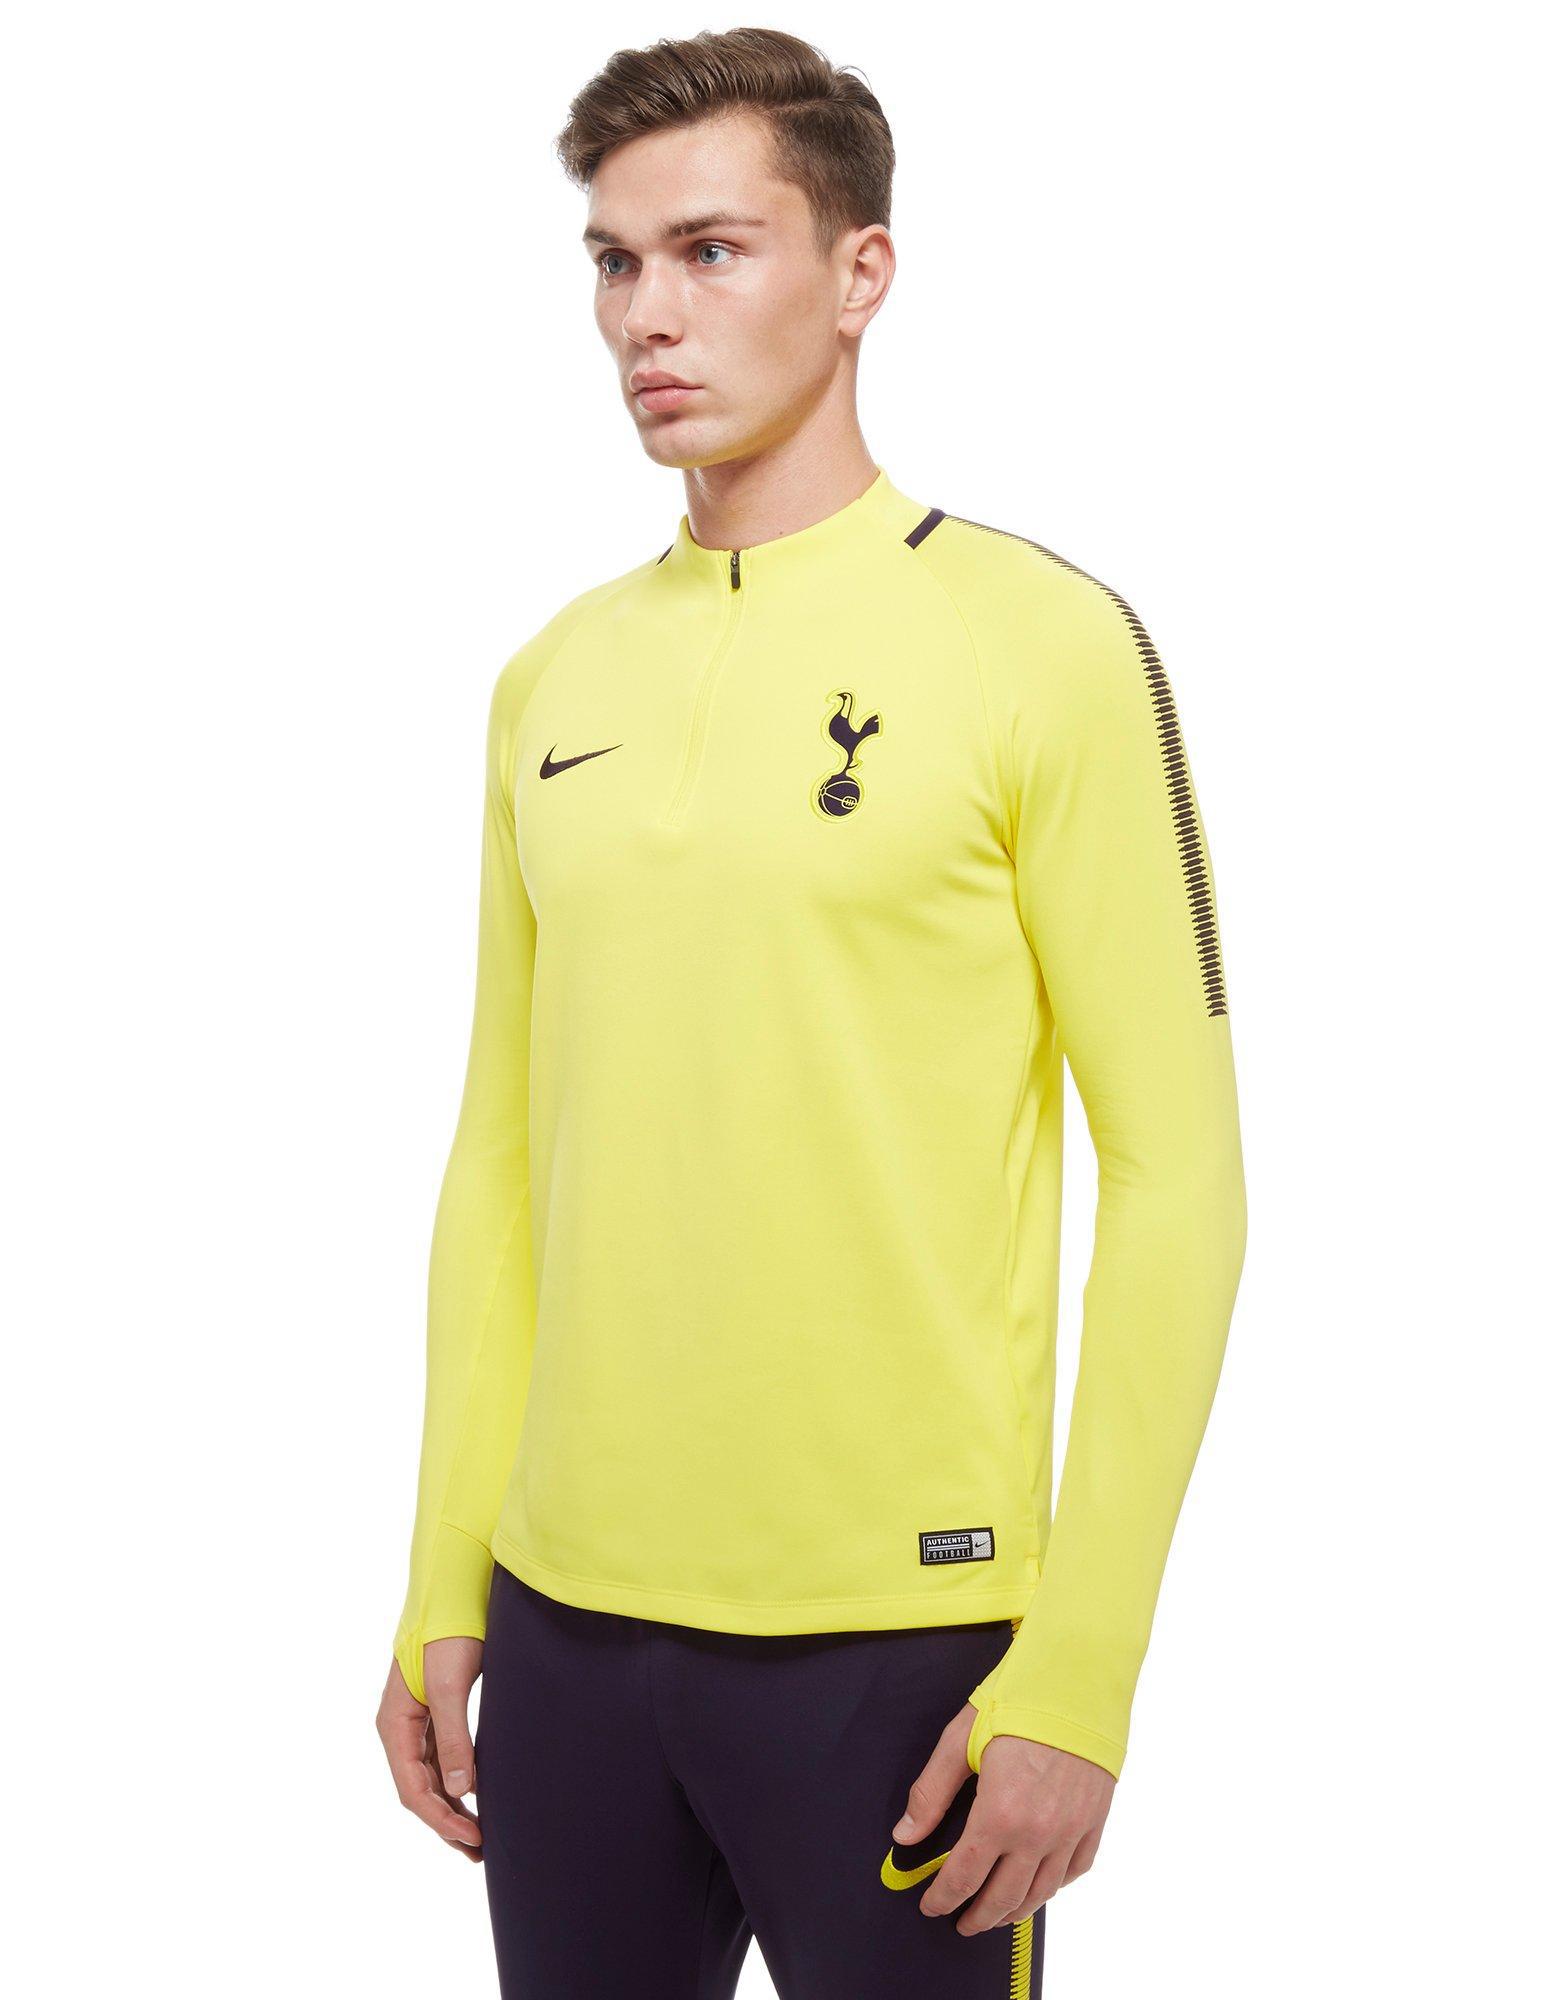 Lyst - Nike Tottenham Hotspur 2017 Squad Drill Top in Yellow for Men